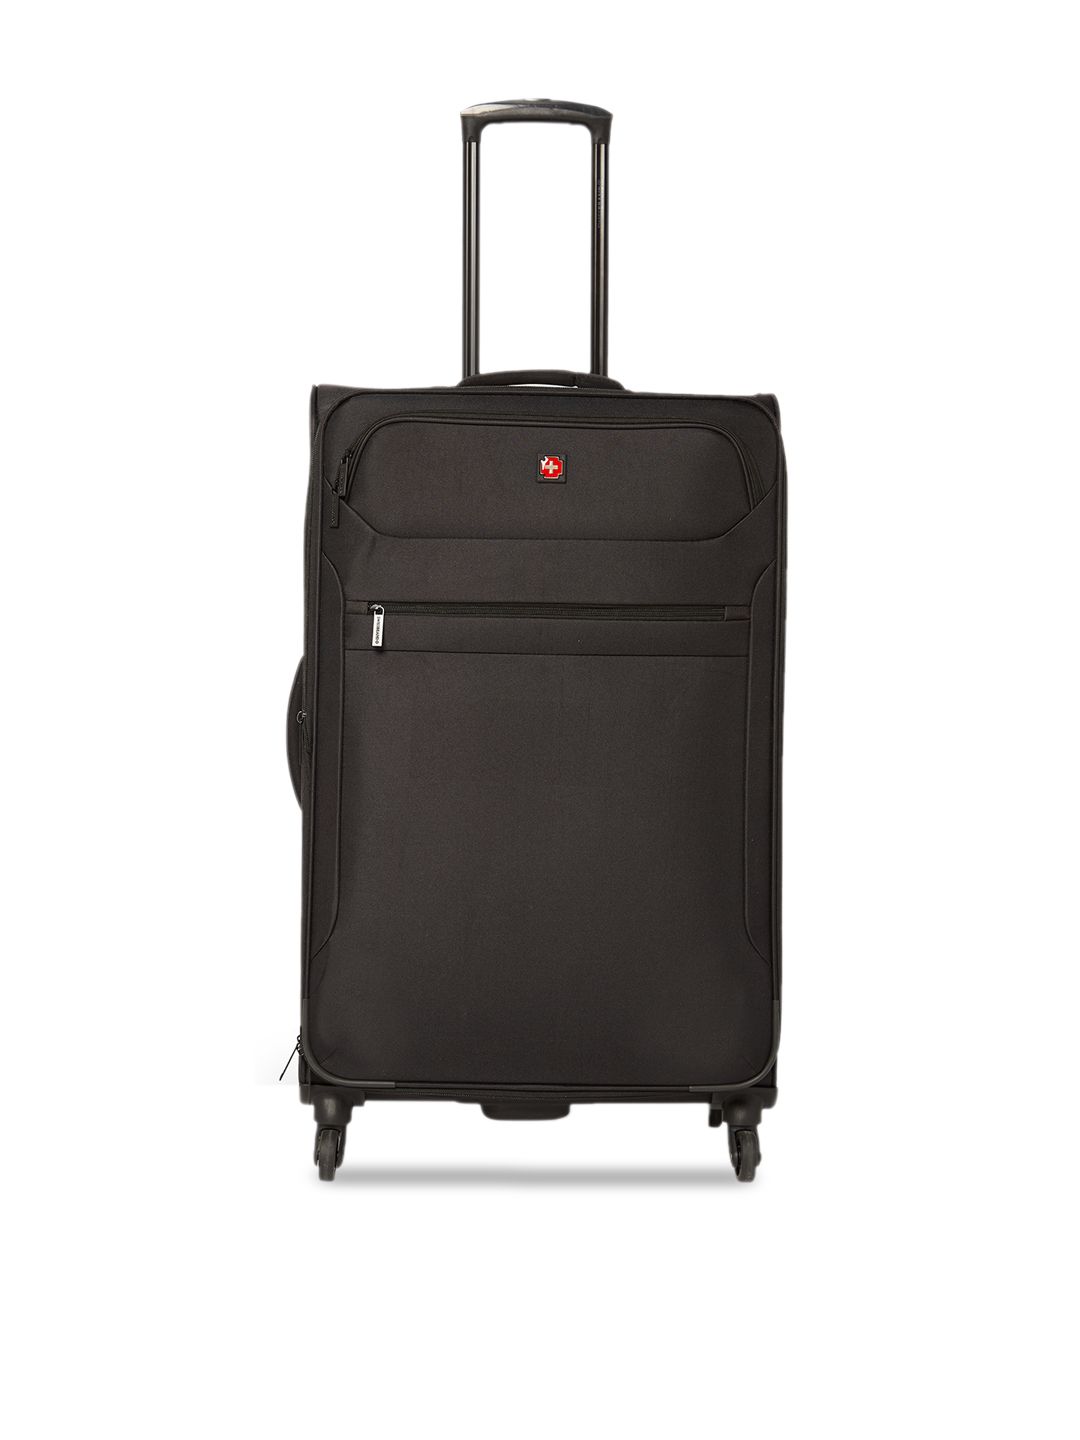 SWISS BRAND Unisex Black Solid Hamilton 360-Degree Rotation Soft-Sided Large Trolley Suitcase Price in India